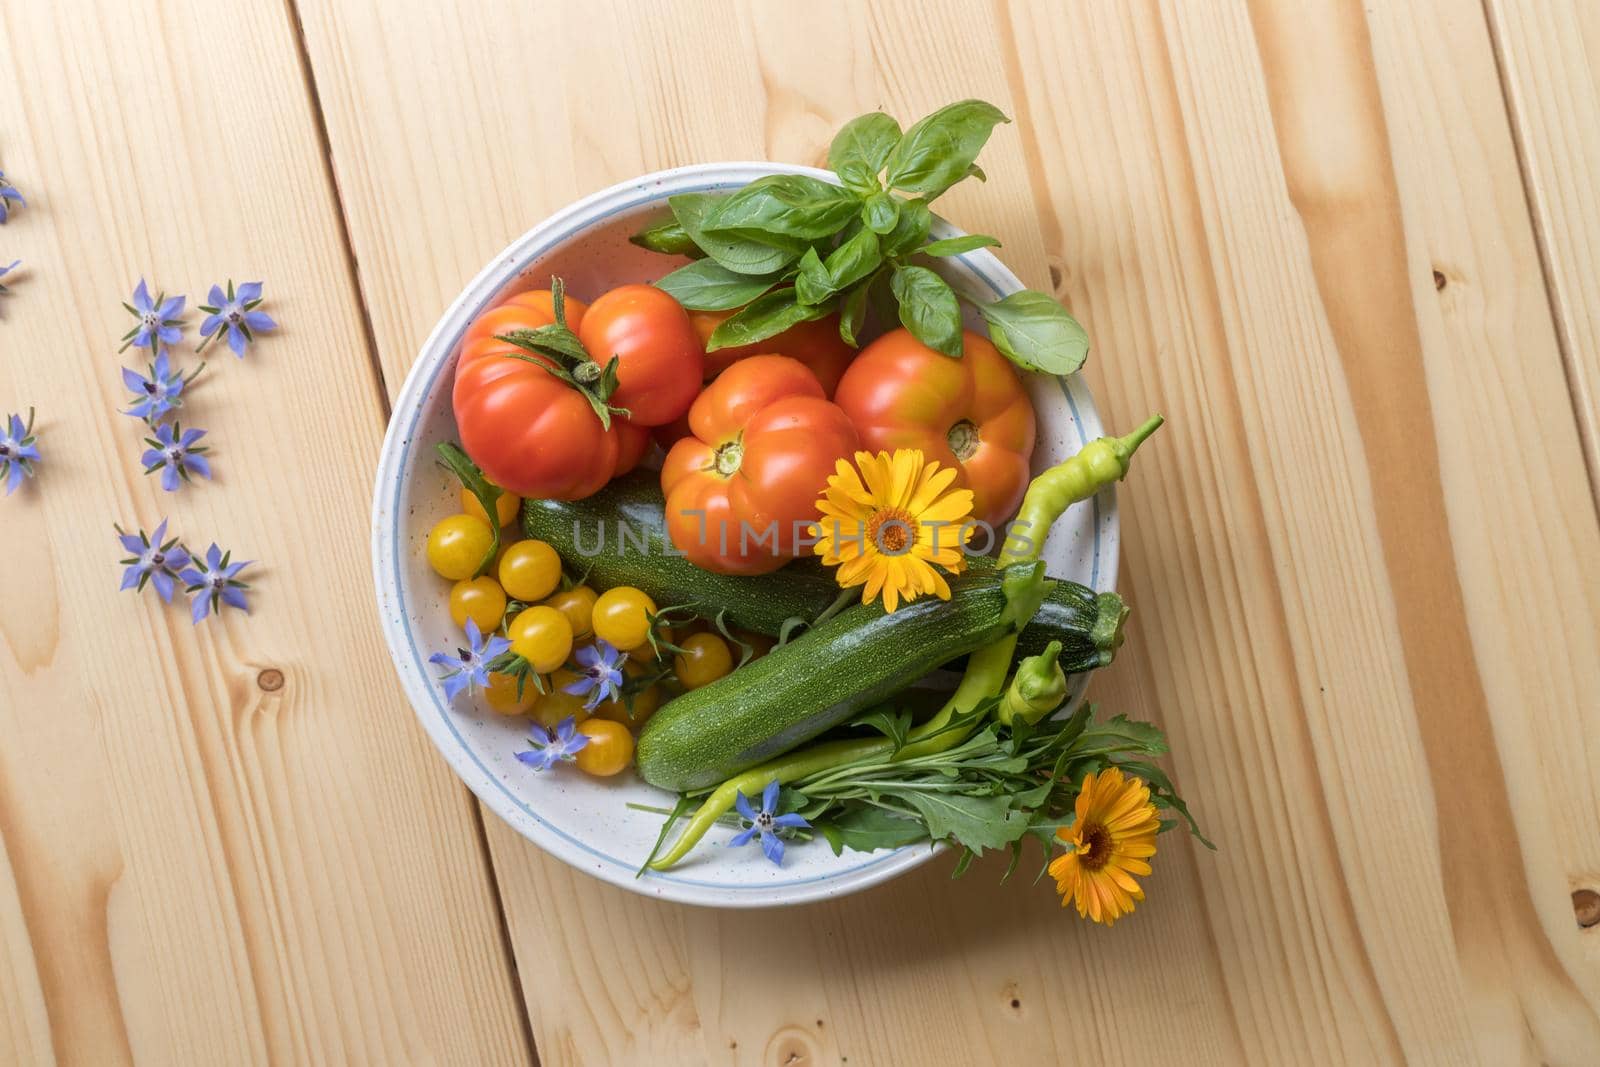 Urban gardening: Fresh cultivated vegetables grown up in the own garden. Tomatoes, zucchini and herbs by Daxenbichler